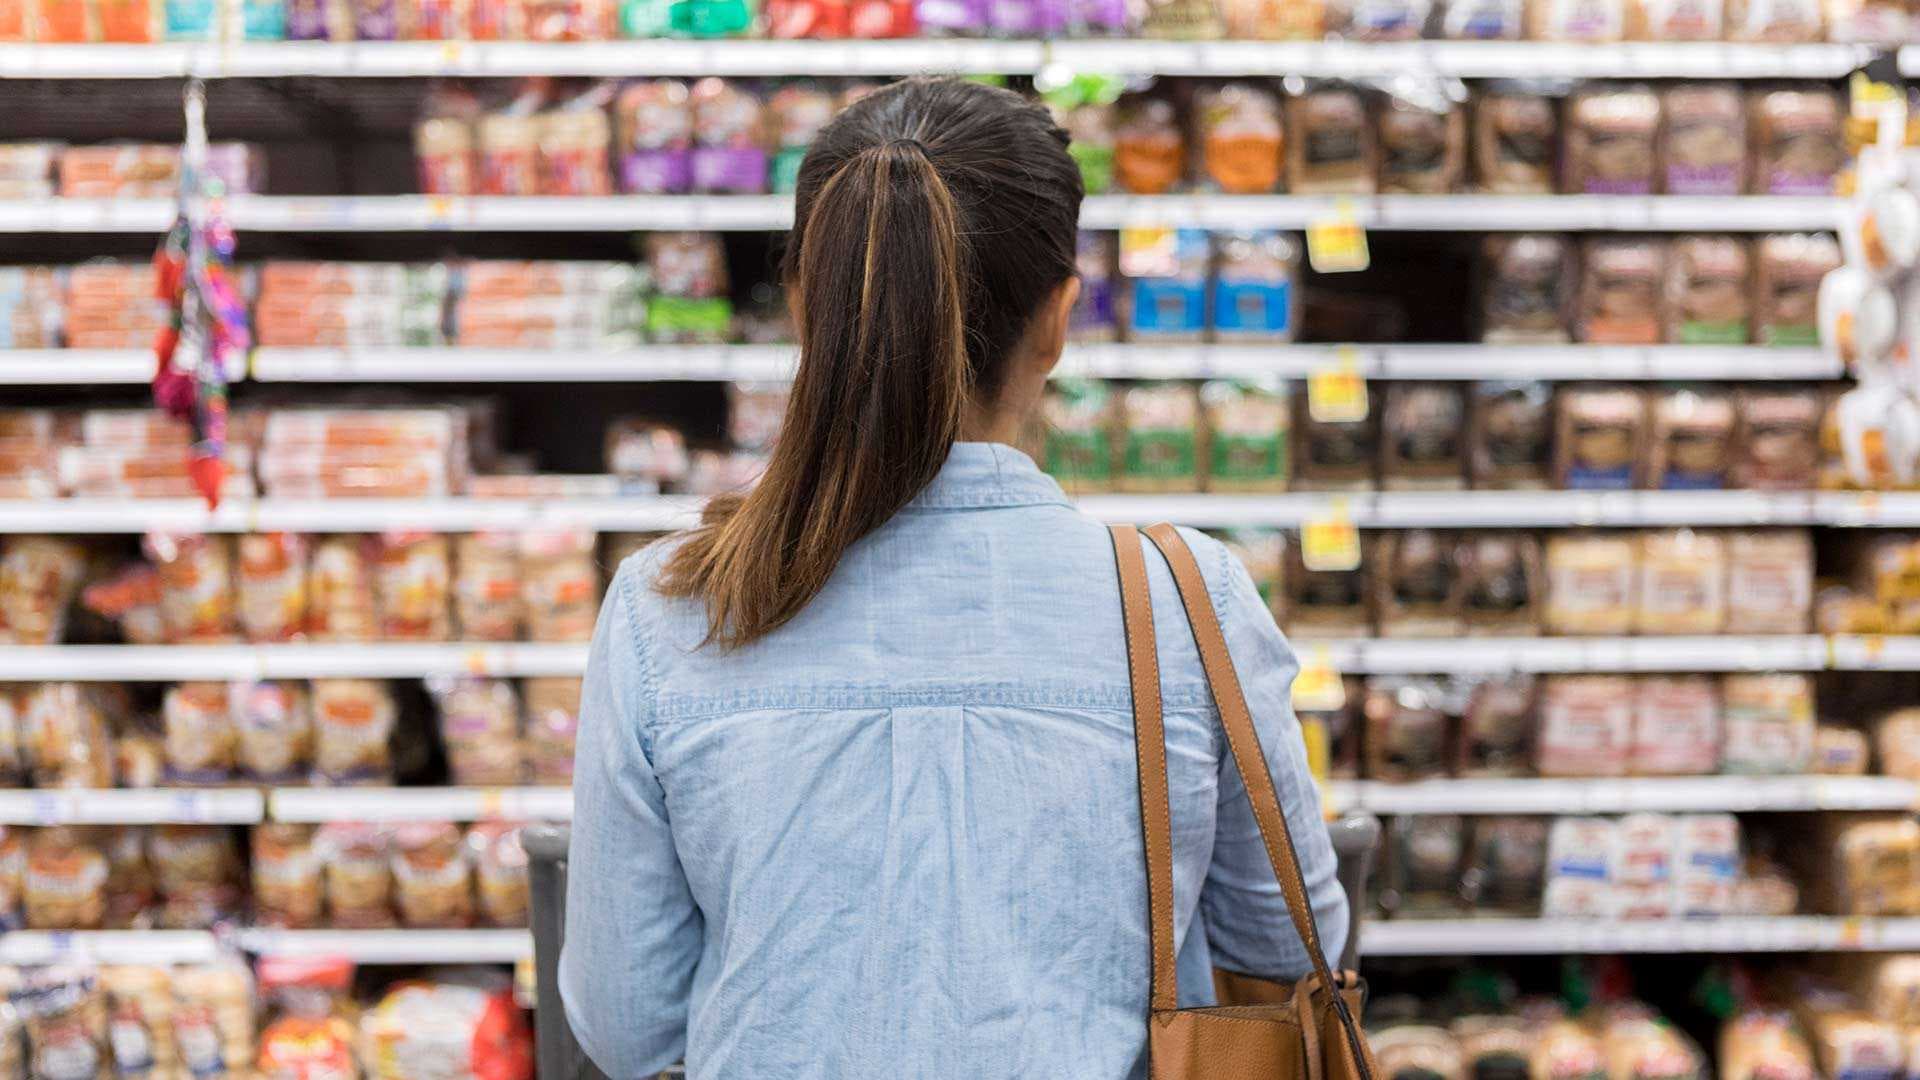 Shopper looks at shelves at grocery store